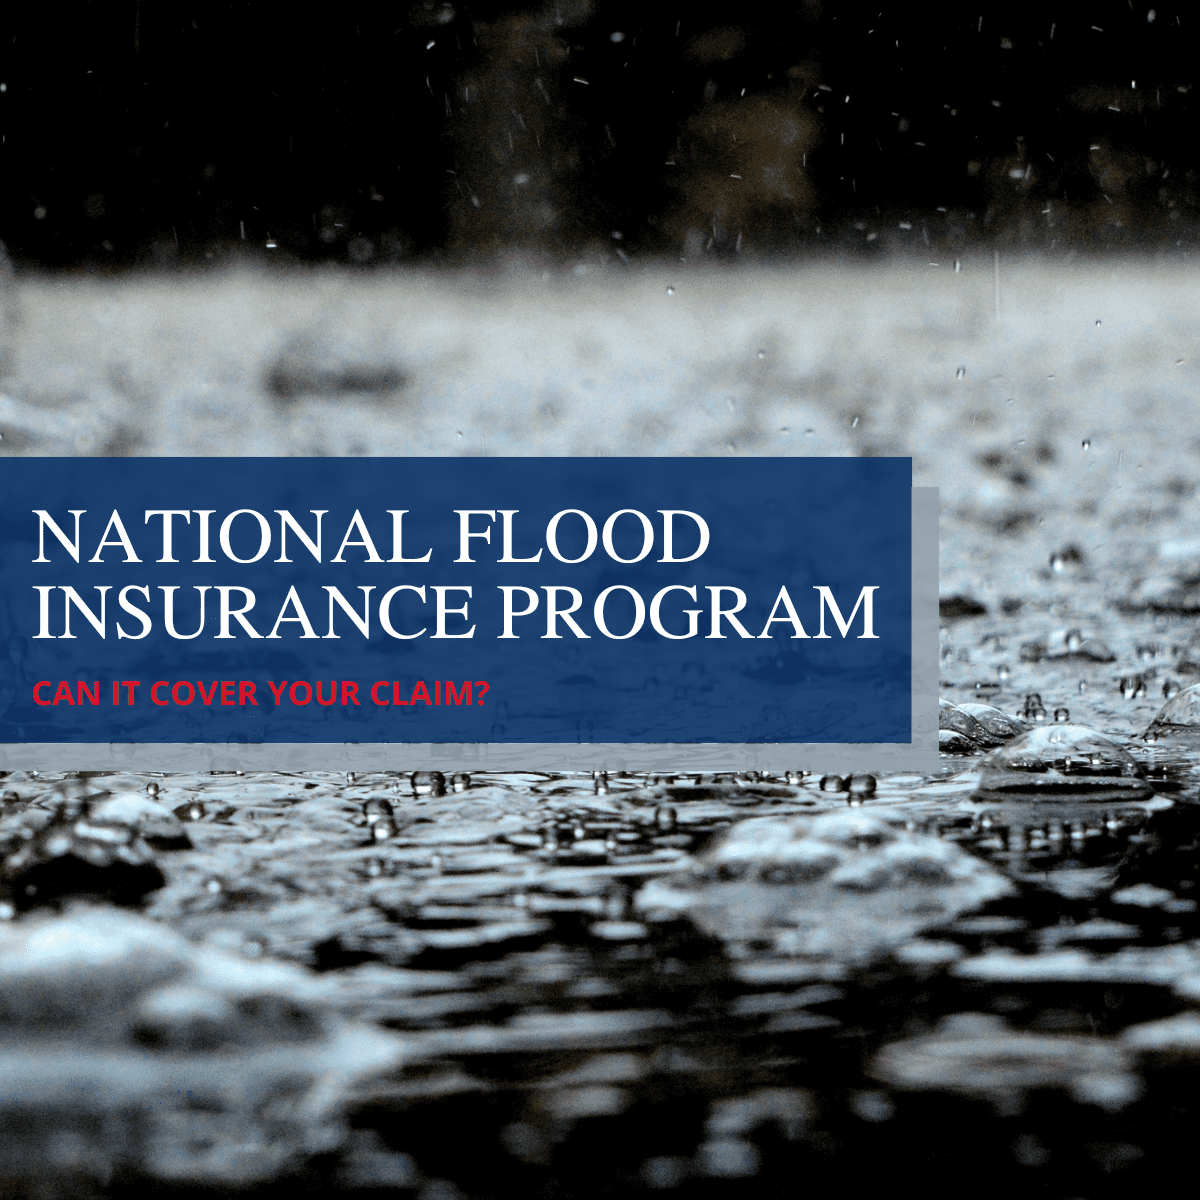 Can You Get Your Claim Covered By the National Flood Insurance Program?